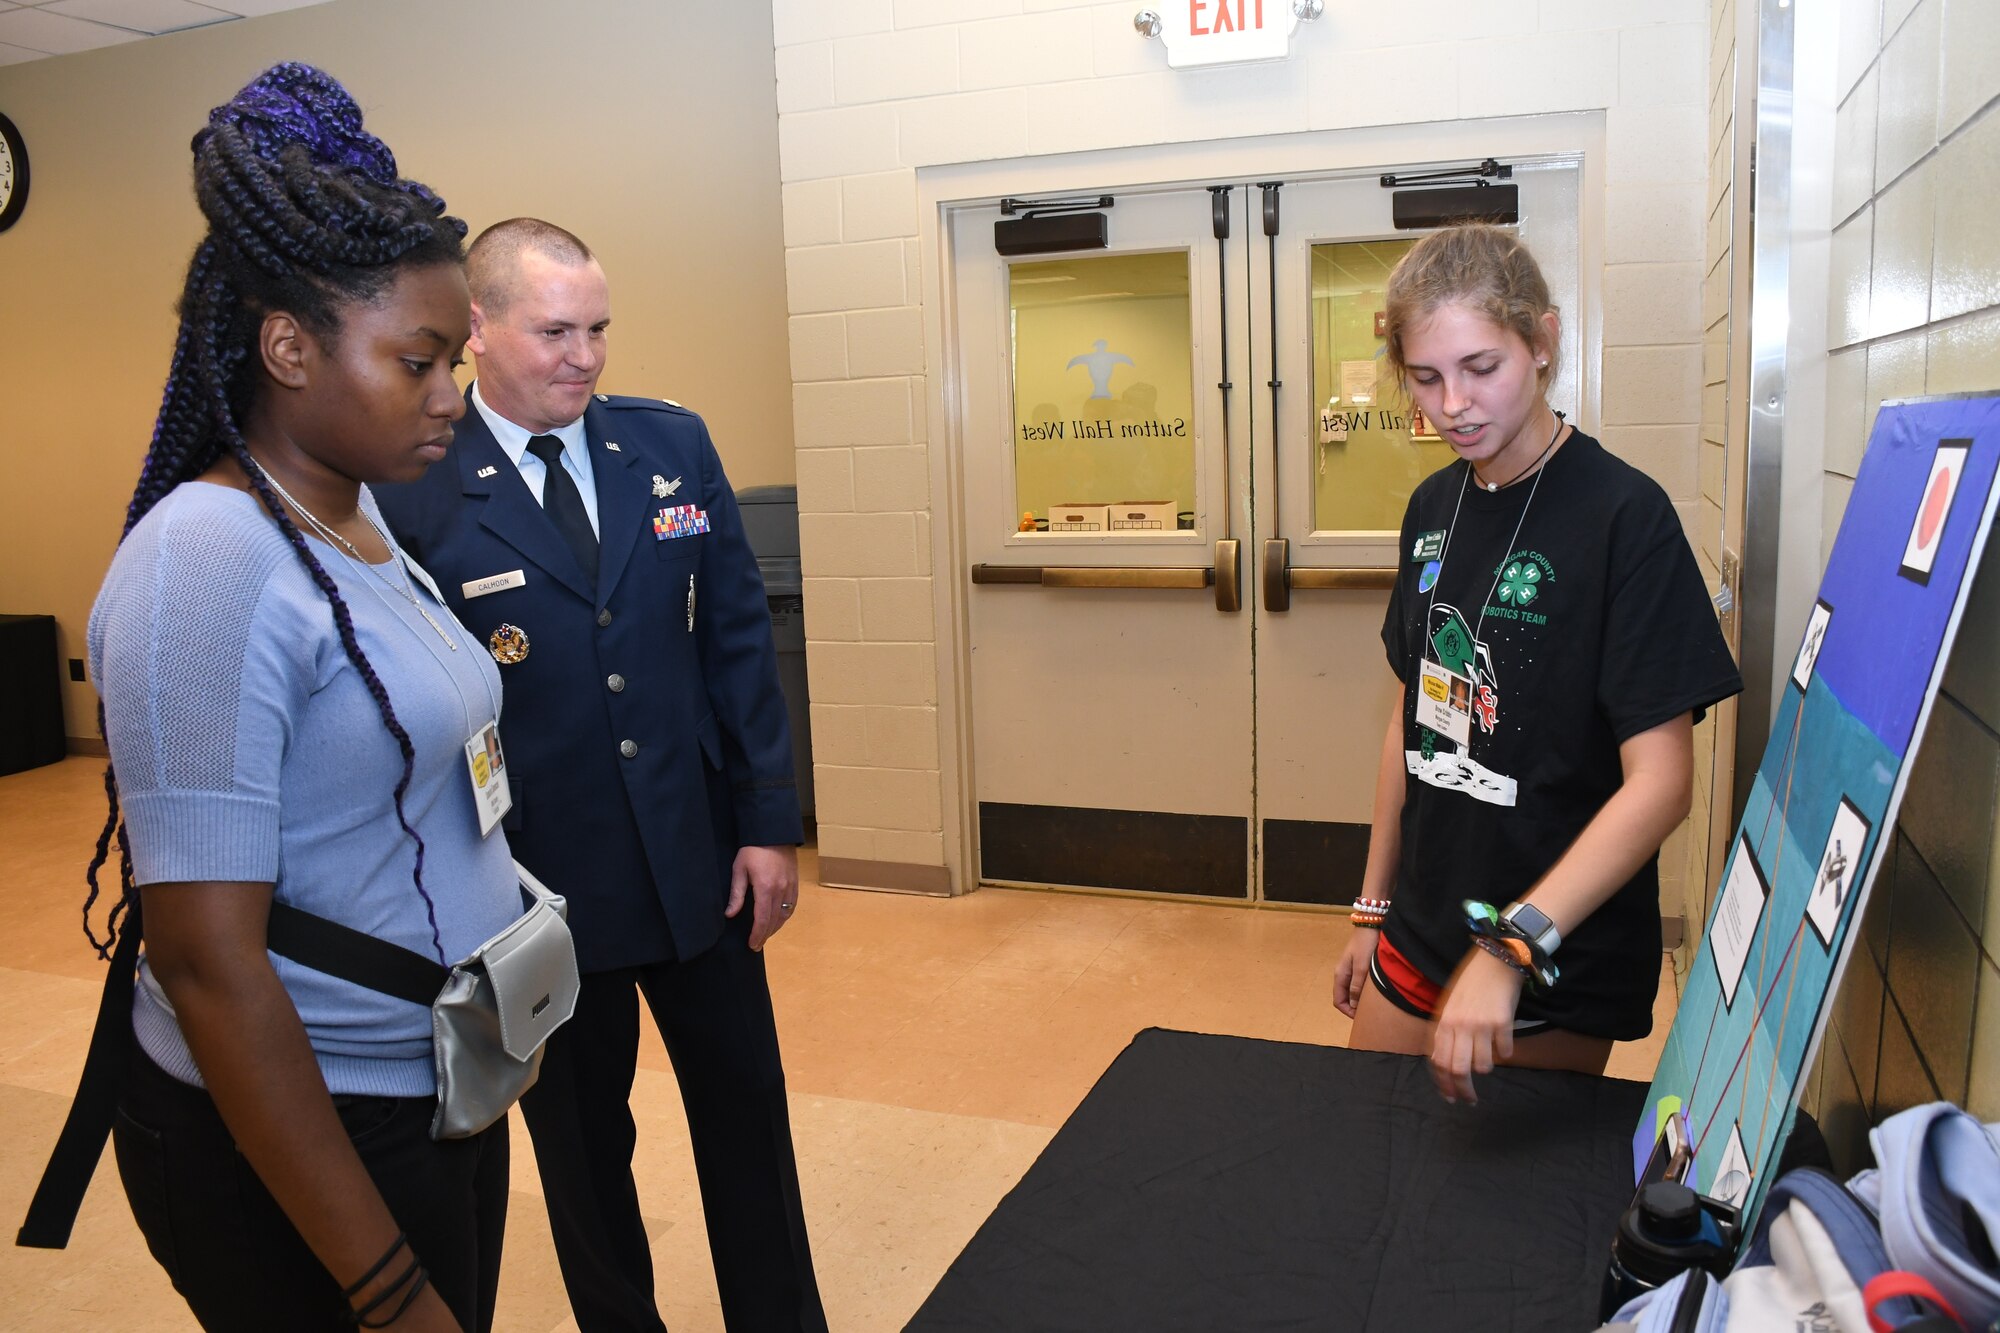 Maj. Benjamin Calhoon, 22nd Air Force executive officer, listens to presentation from Drew Cribbs, high school student from Madison, Ga., about GPS technology at Rock Eagle 4-H Center in Eatonton, Ga., Aug 17, 2019. Maj. Calhoon served as capnote speaker for the event and in previous assignments oversaw operations and policy for GPS.